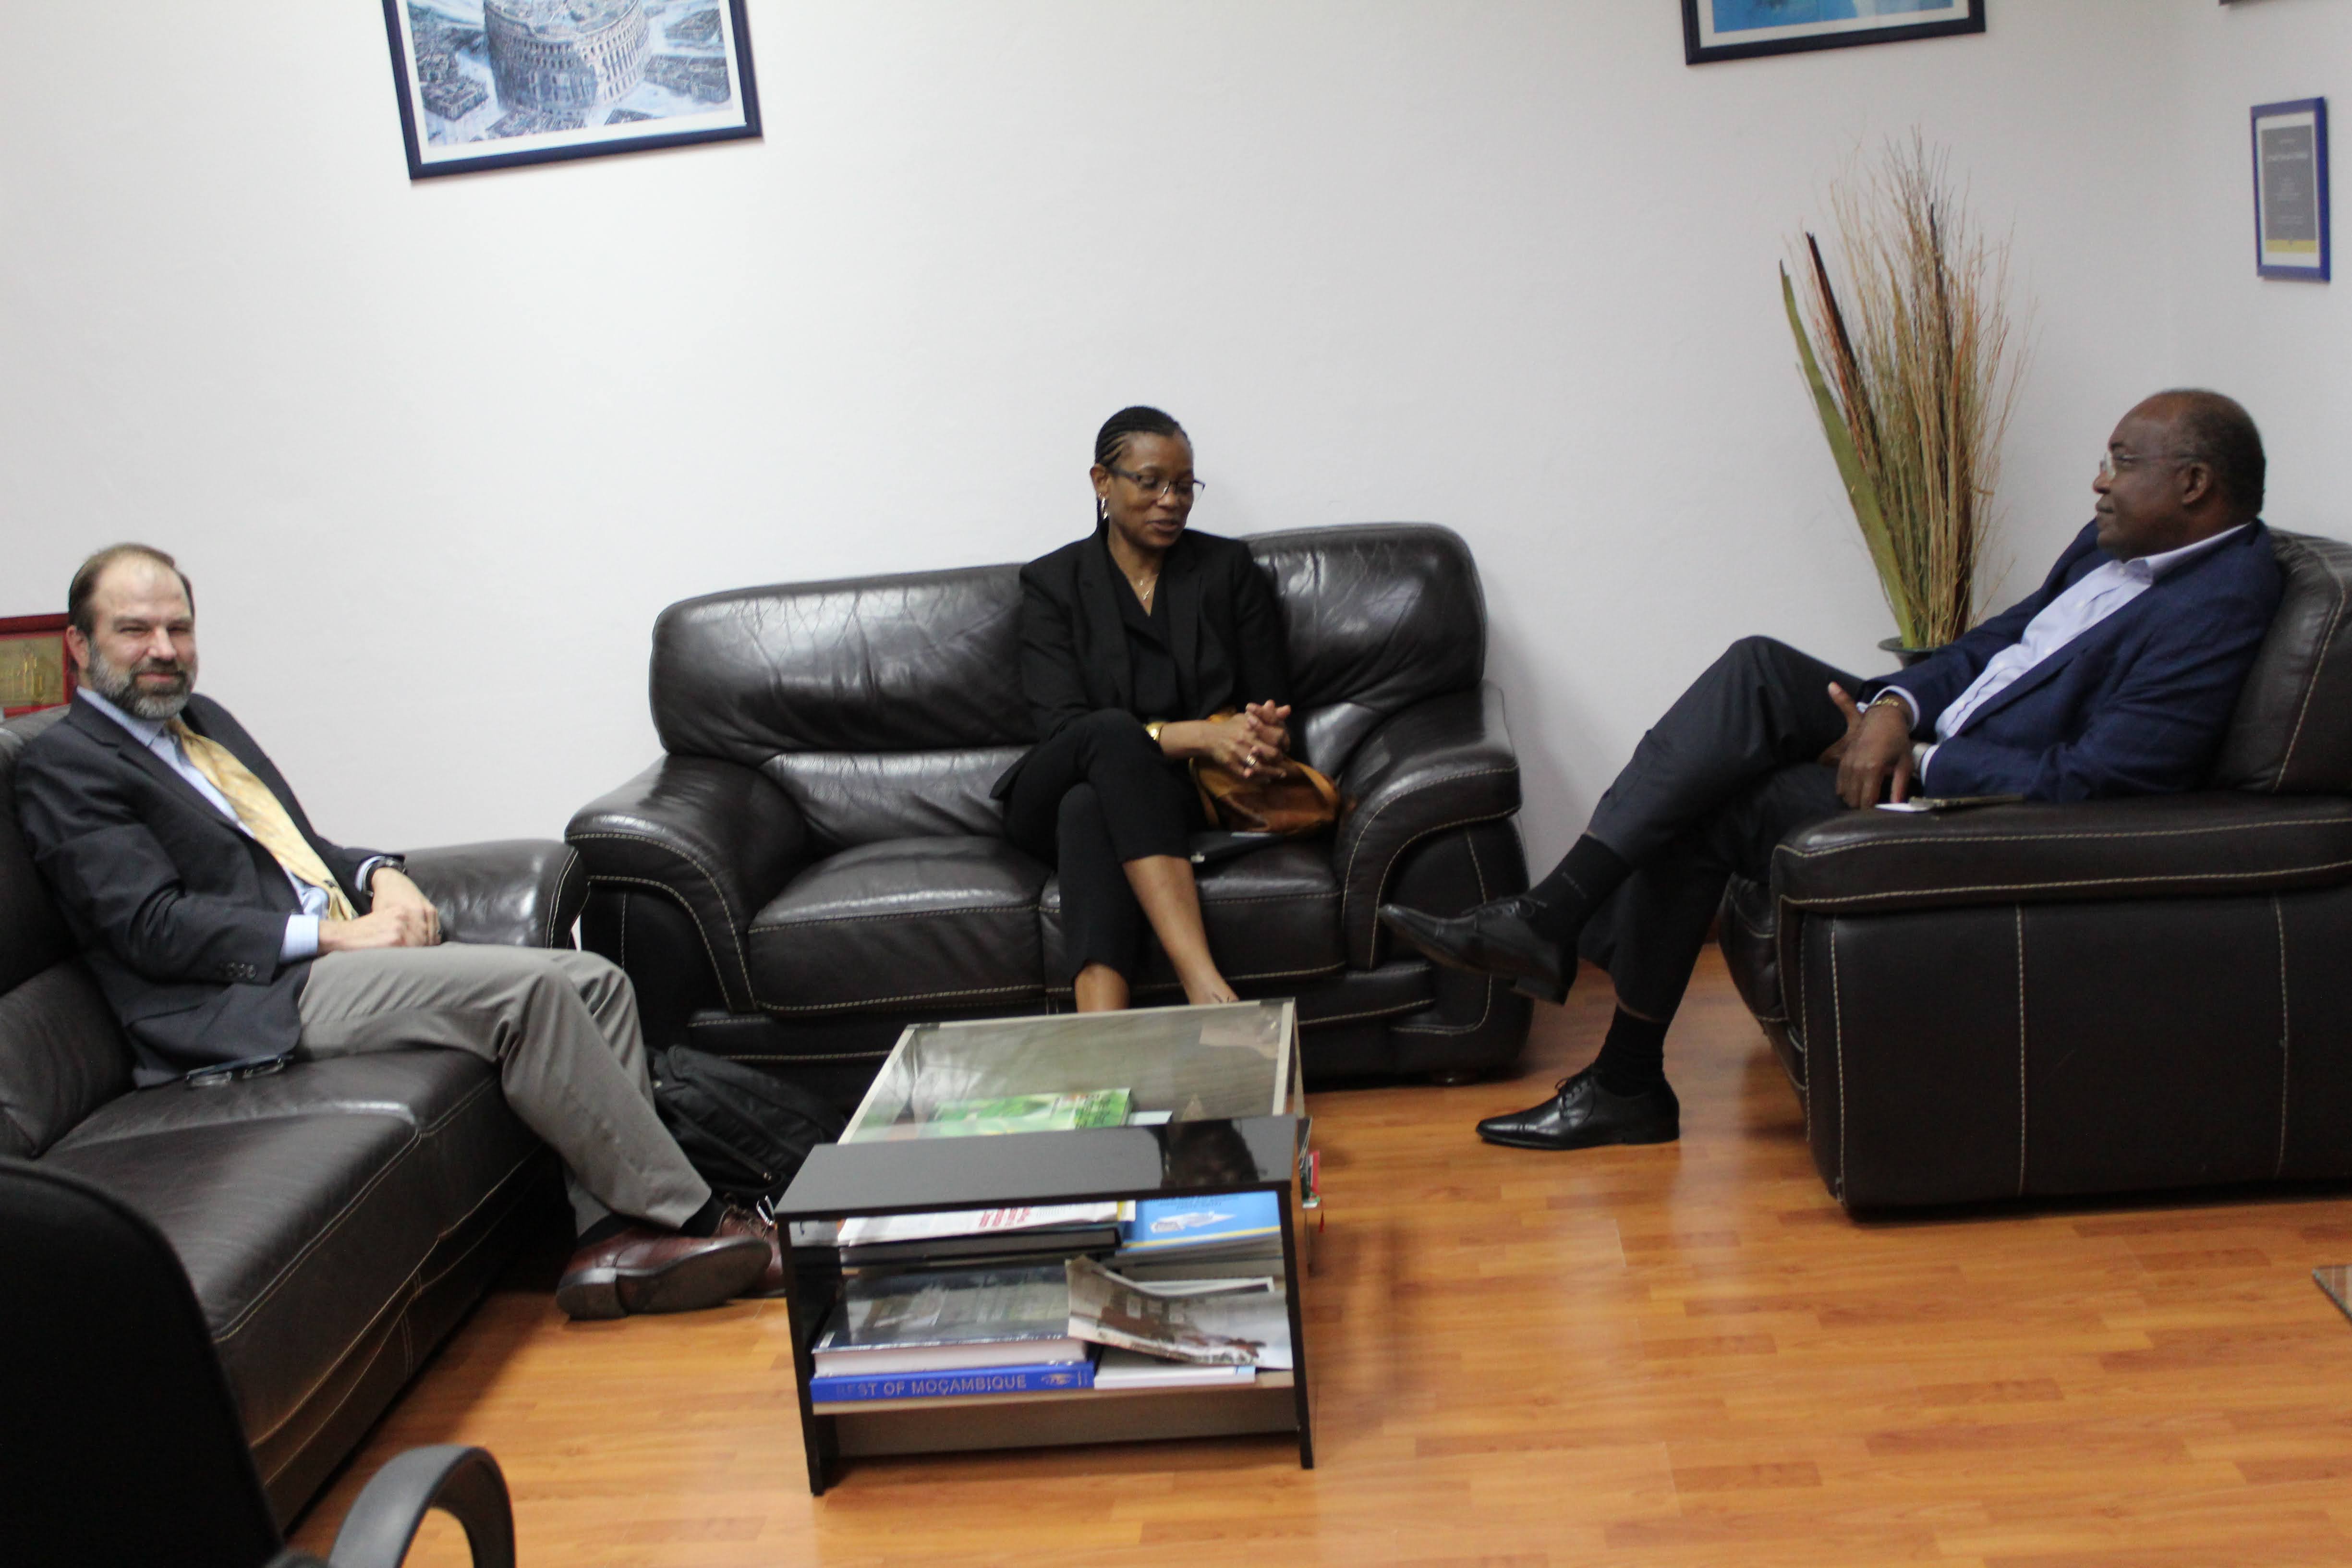 Dr. Brian Norris with officials from his host institution, Universidade Pedagogica de Mapu. Pictured are Dr. Sarita Henriksen and Dr. Jorge Ferrão, rector or president of UP. Ferrão is former Minister of Education of Mozambique.